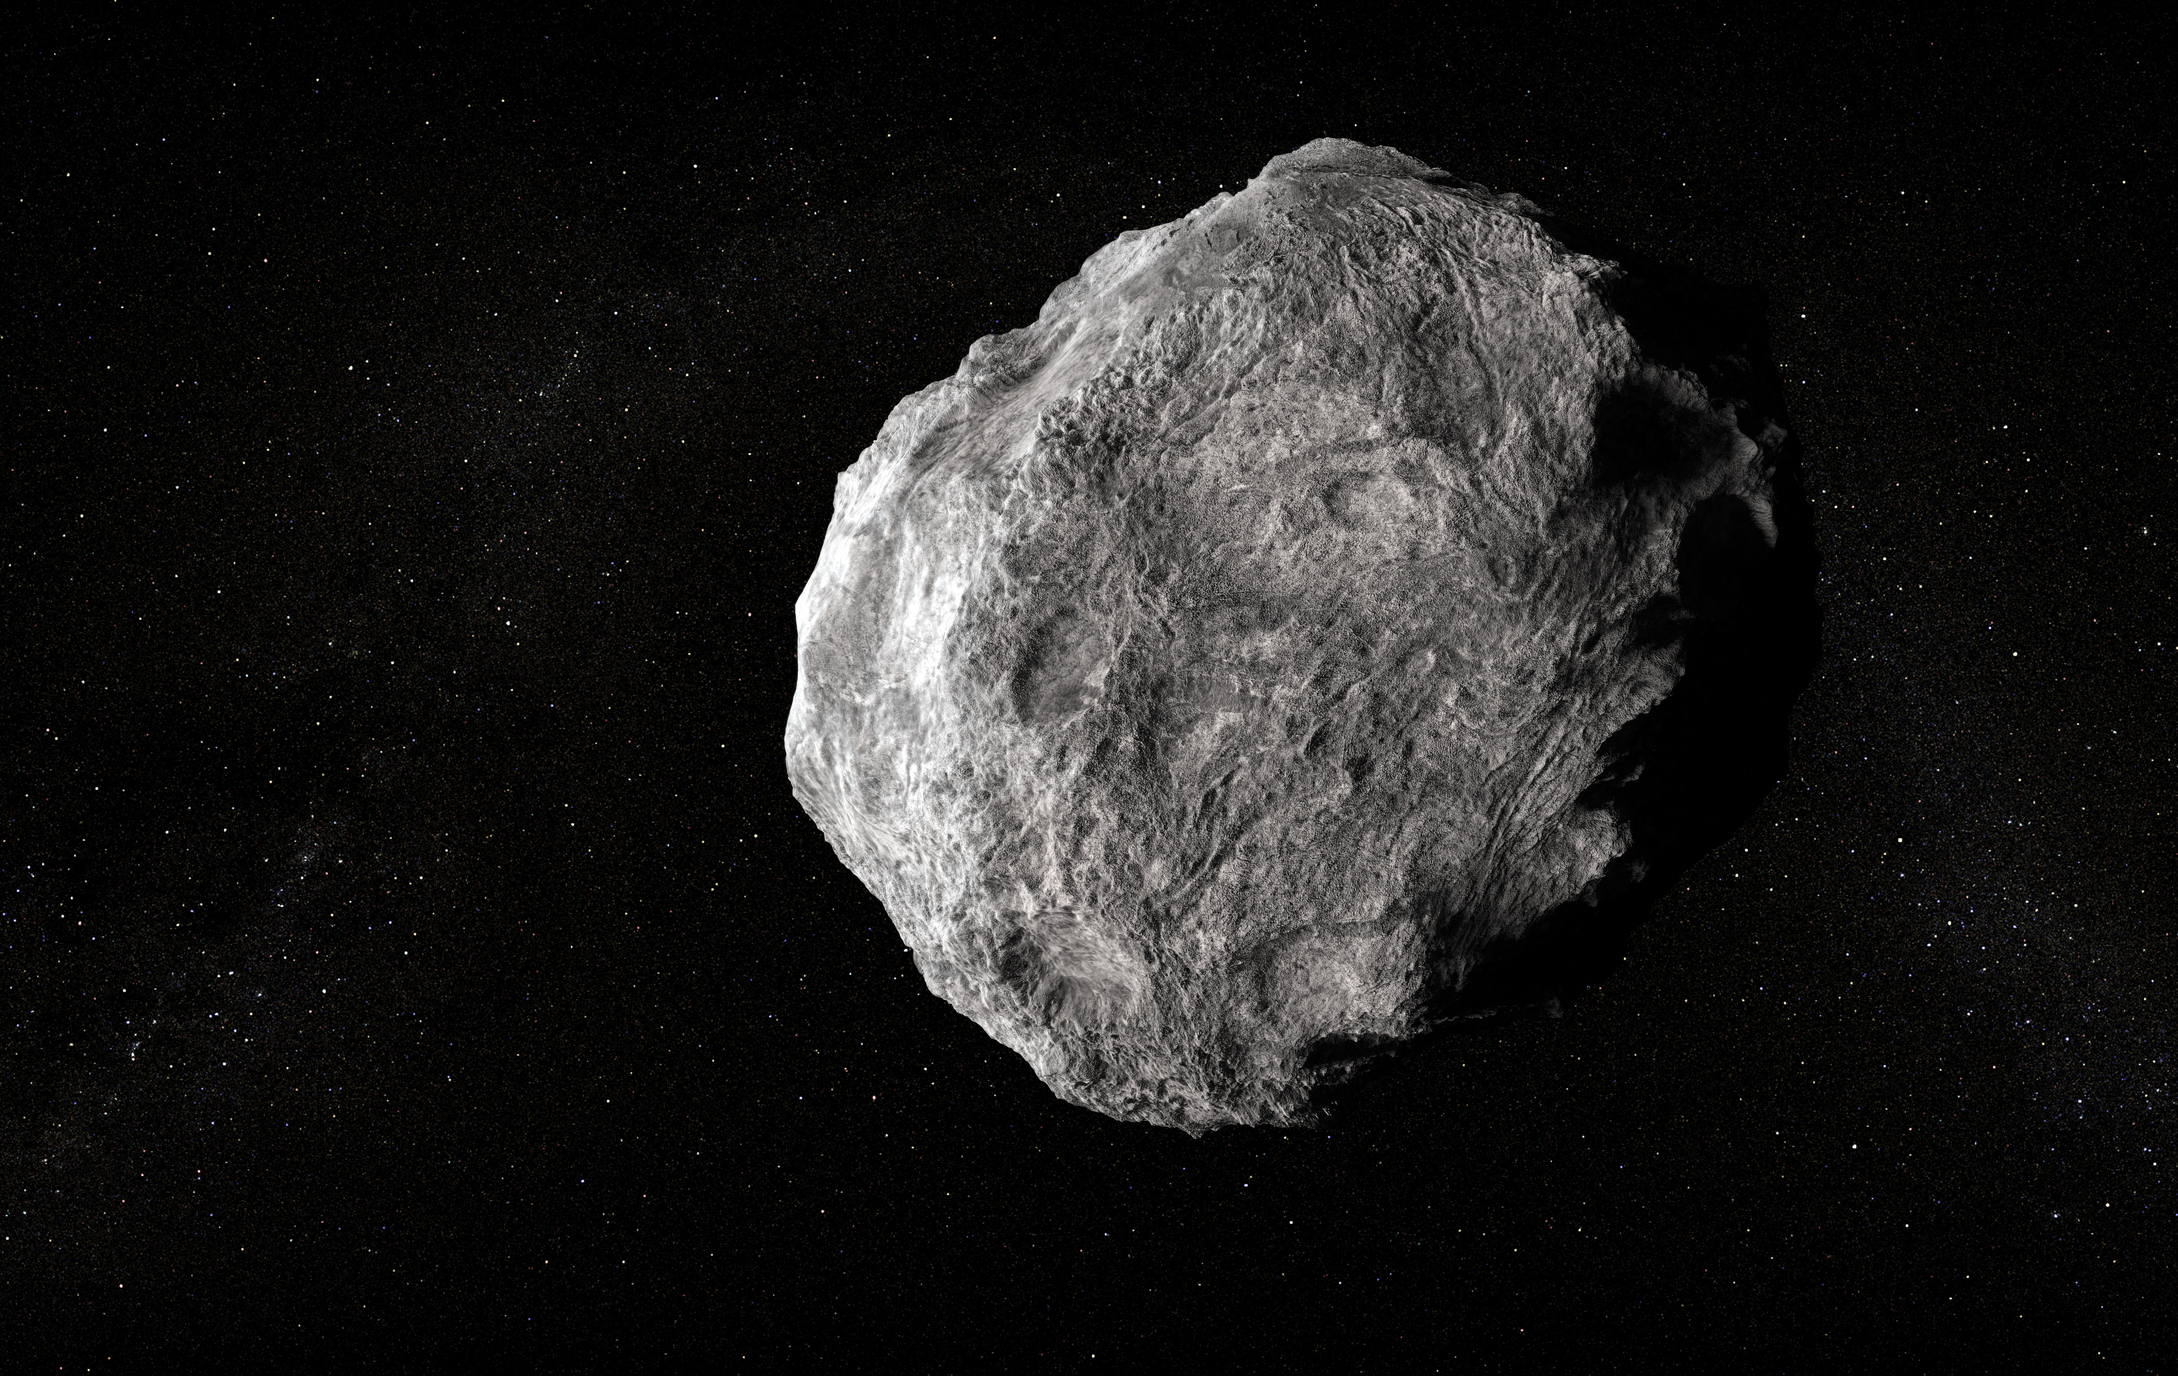 Photo Shows Asteroid That Narrowly Missed Earth Traveling at 18,000 MPH - Newsweek